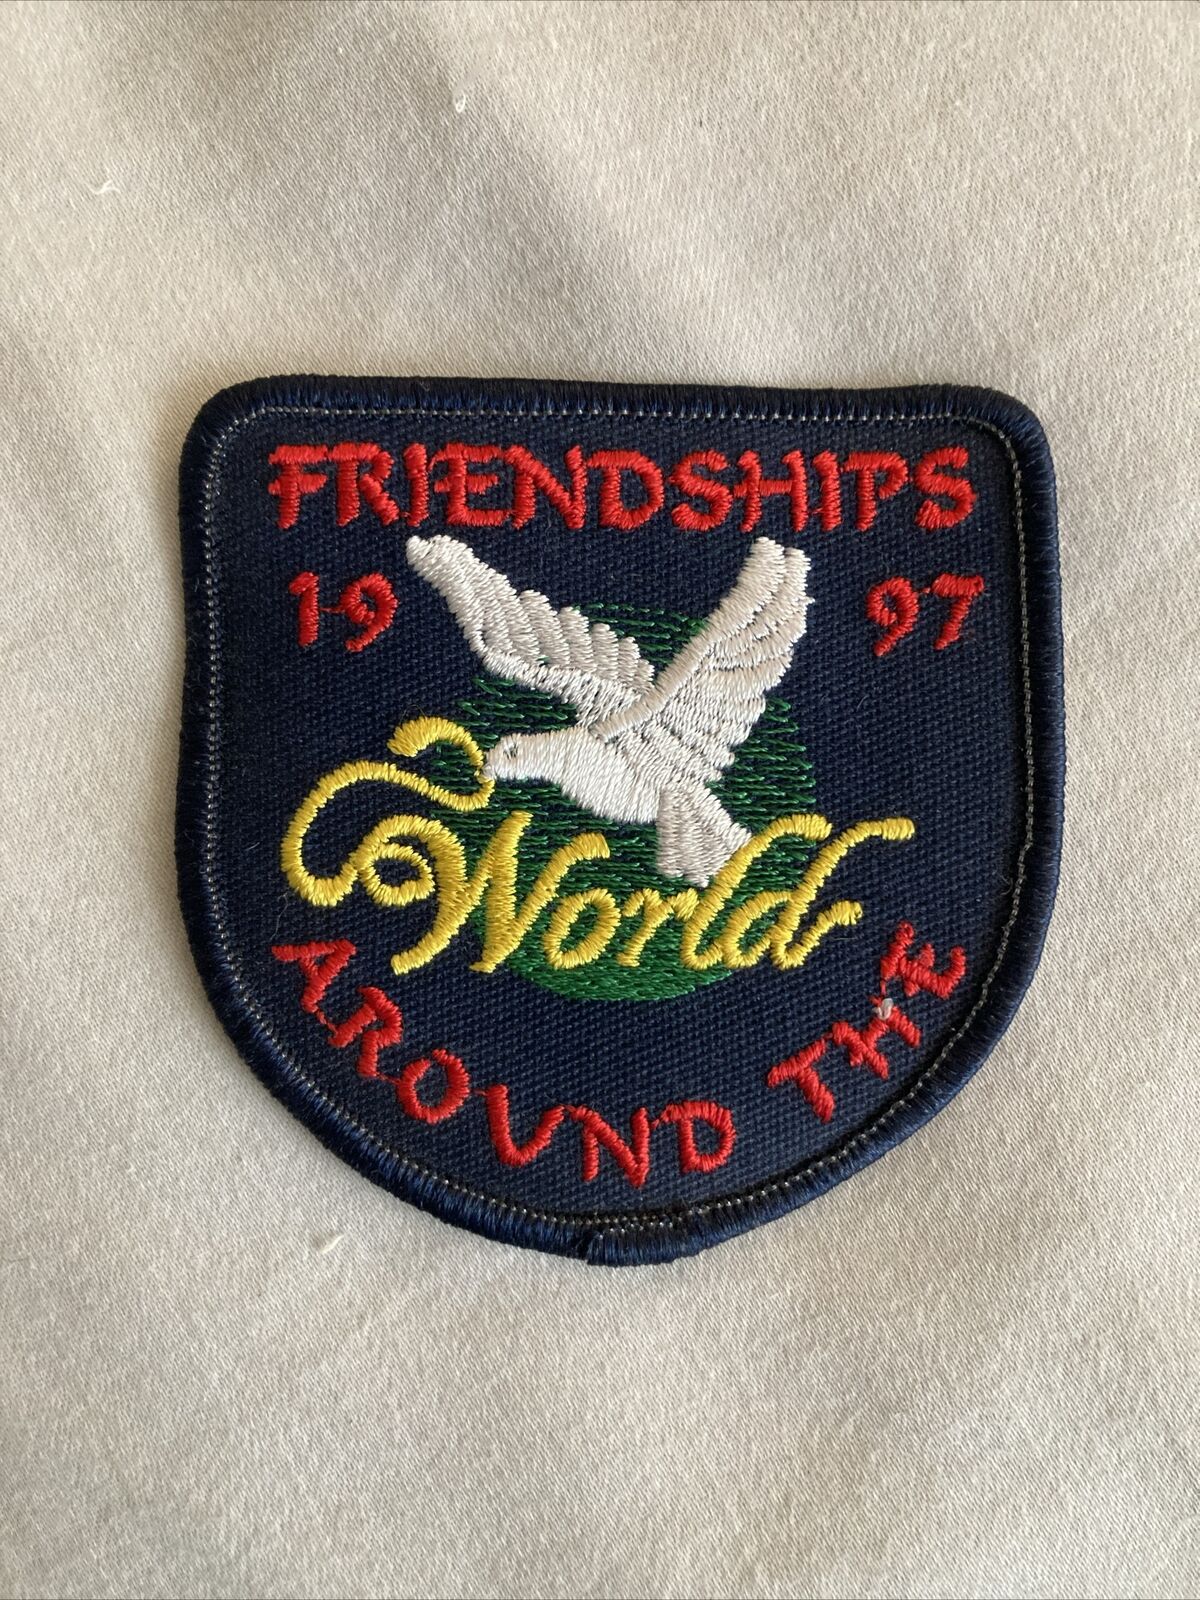 Vintage 1997 - Girl Scouts Patch Friendships Around the World  3x3” Boy Scouts